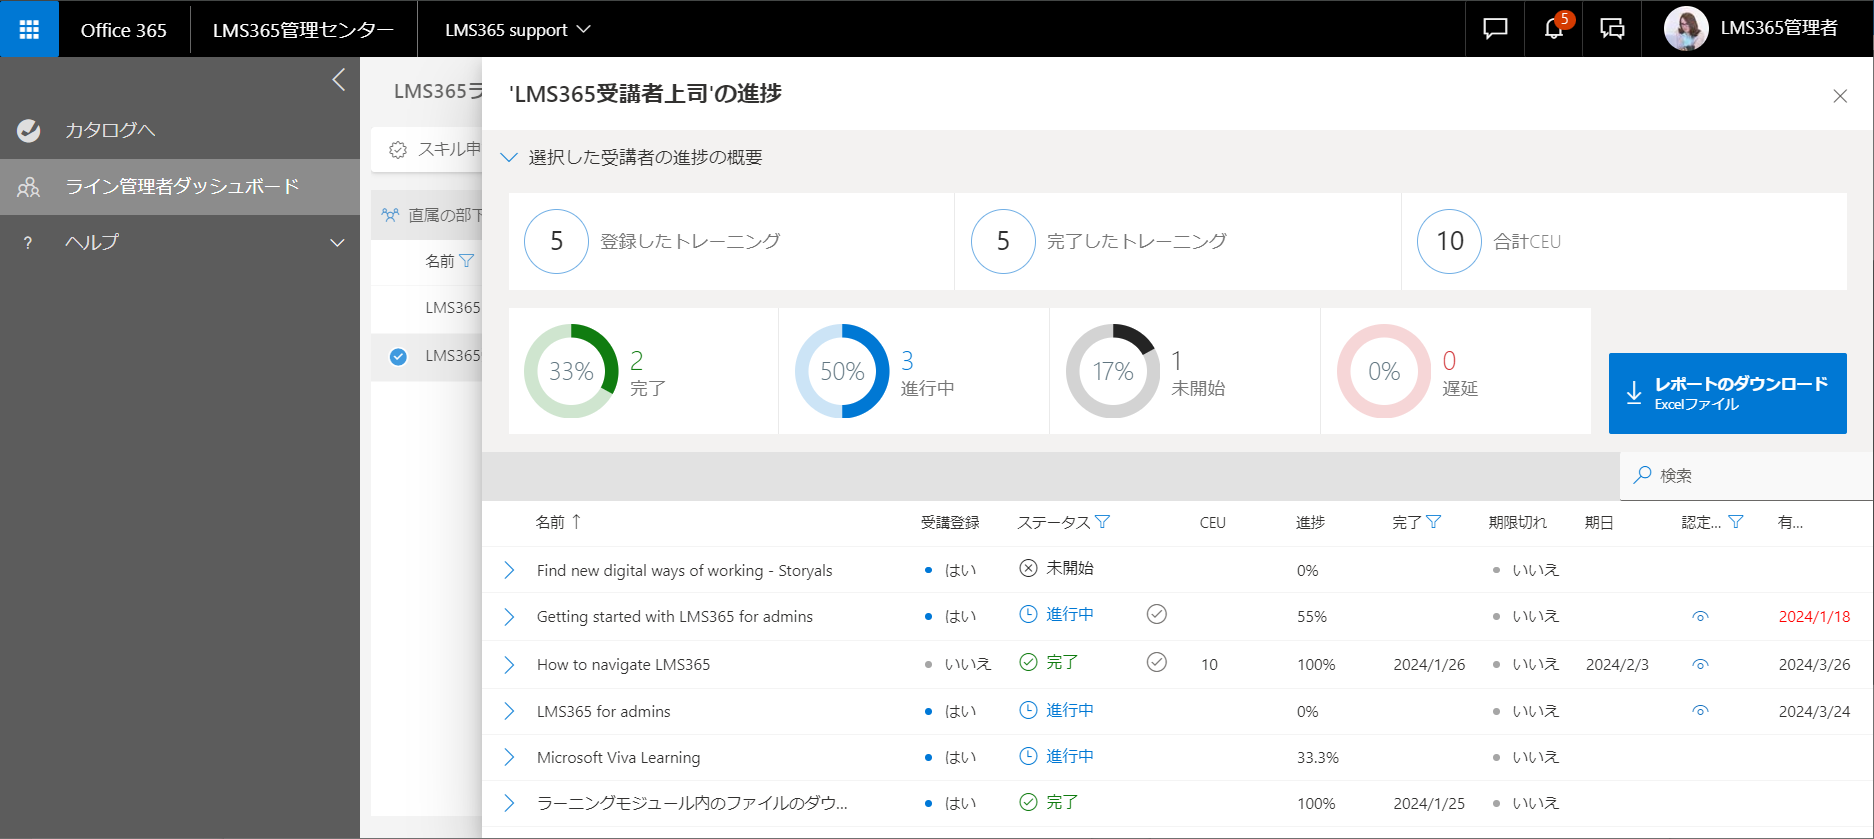 Line Manager Dashboard_User administration7.png